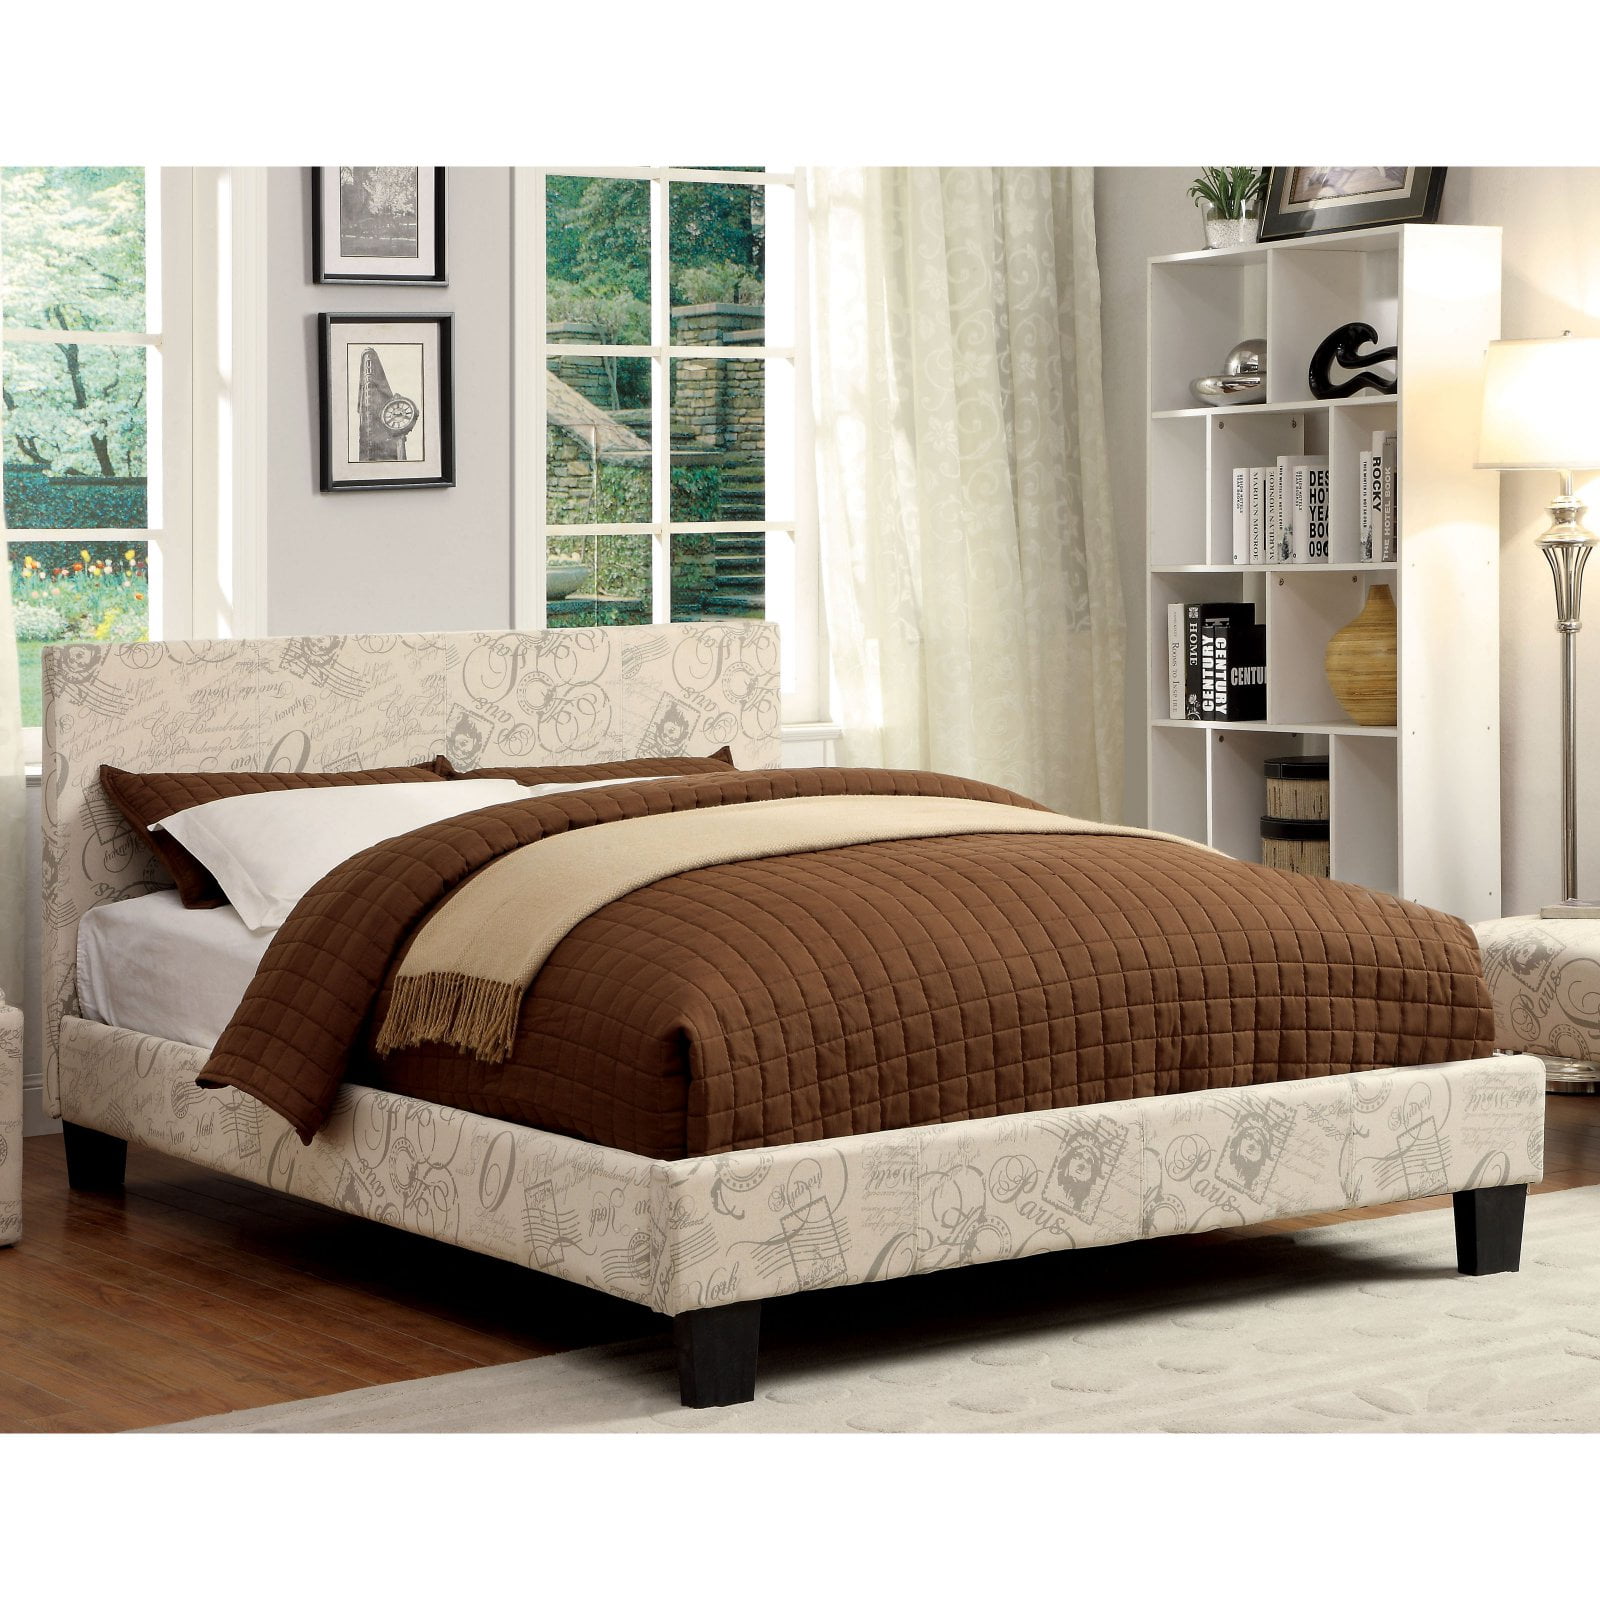 Furniture Of America Kristoff Low, Althea Upholstered Sleigh Bed King